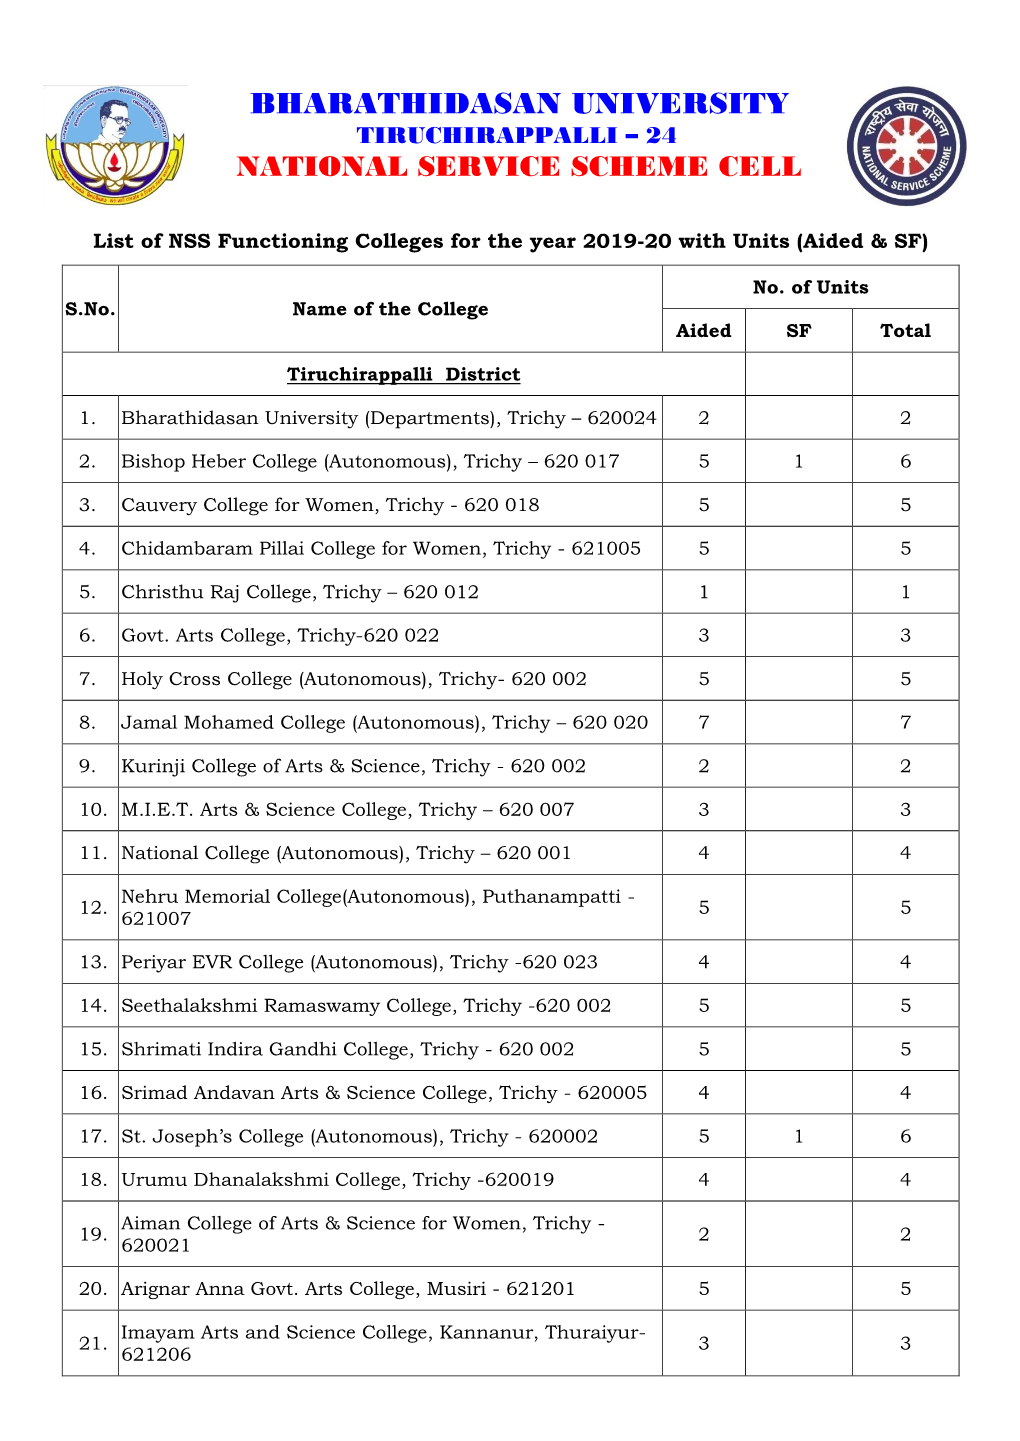 List of Colleges